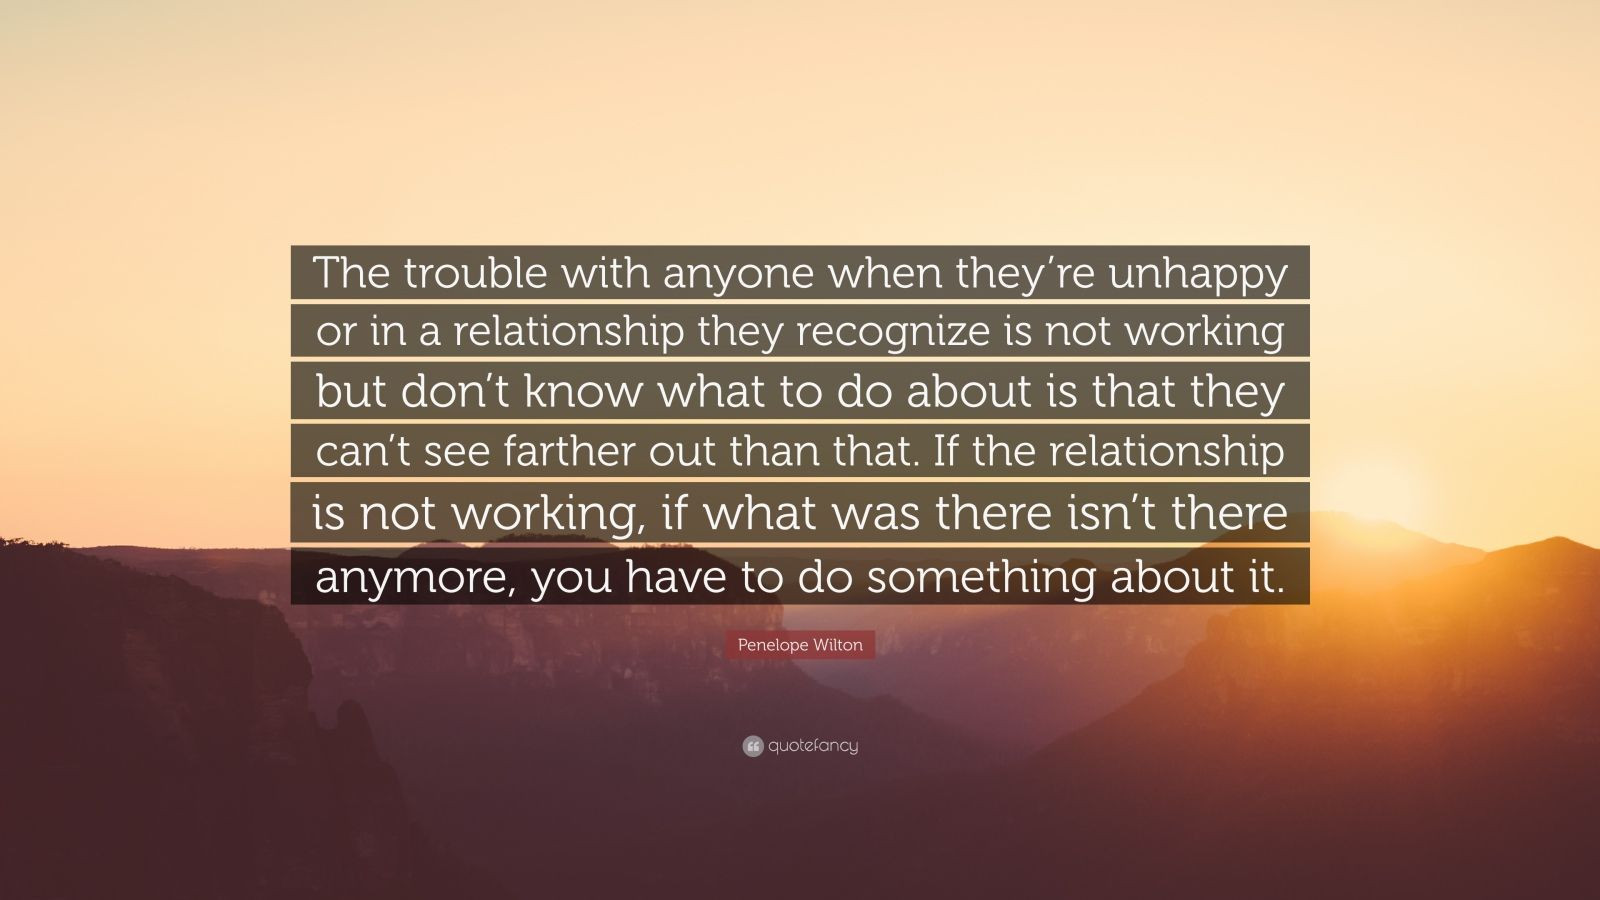 Quotes About Relationships Not Working
 Penelope Wilton Quote “The trouble with anyone when they